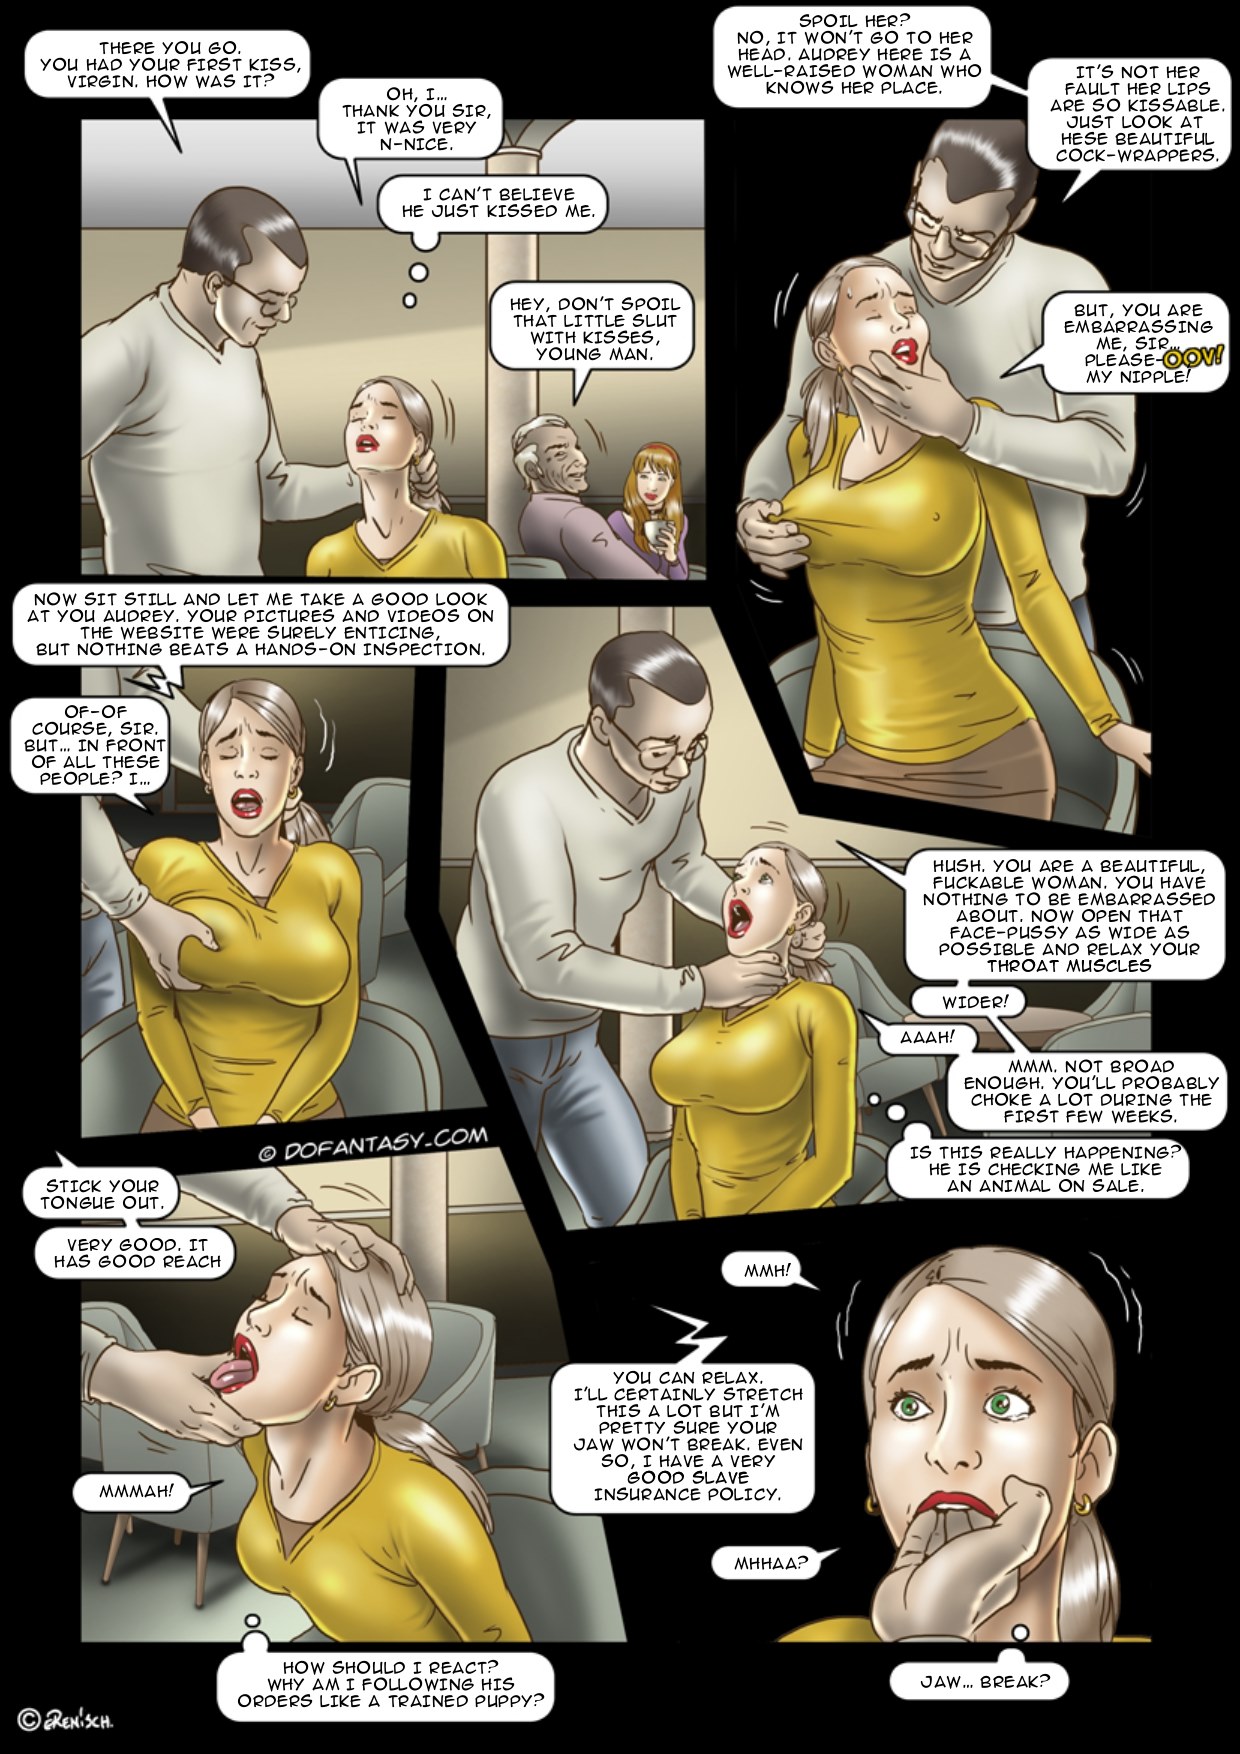 The Date With Fate Erenisch Free Porn Comics